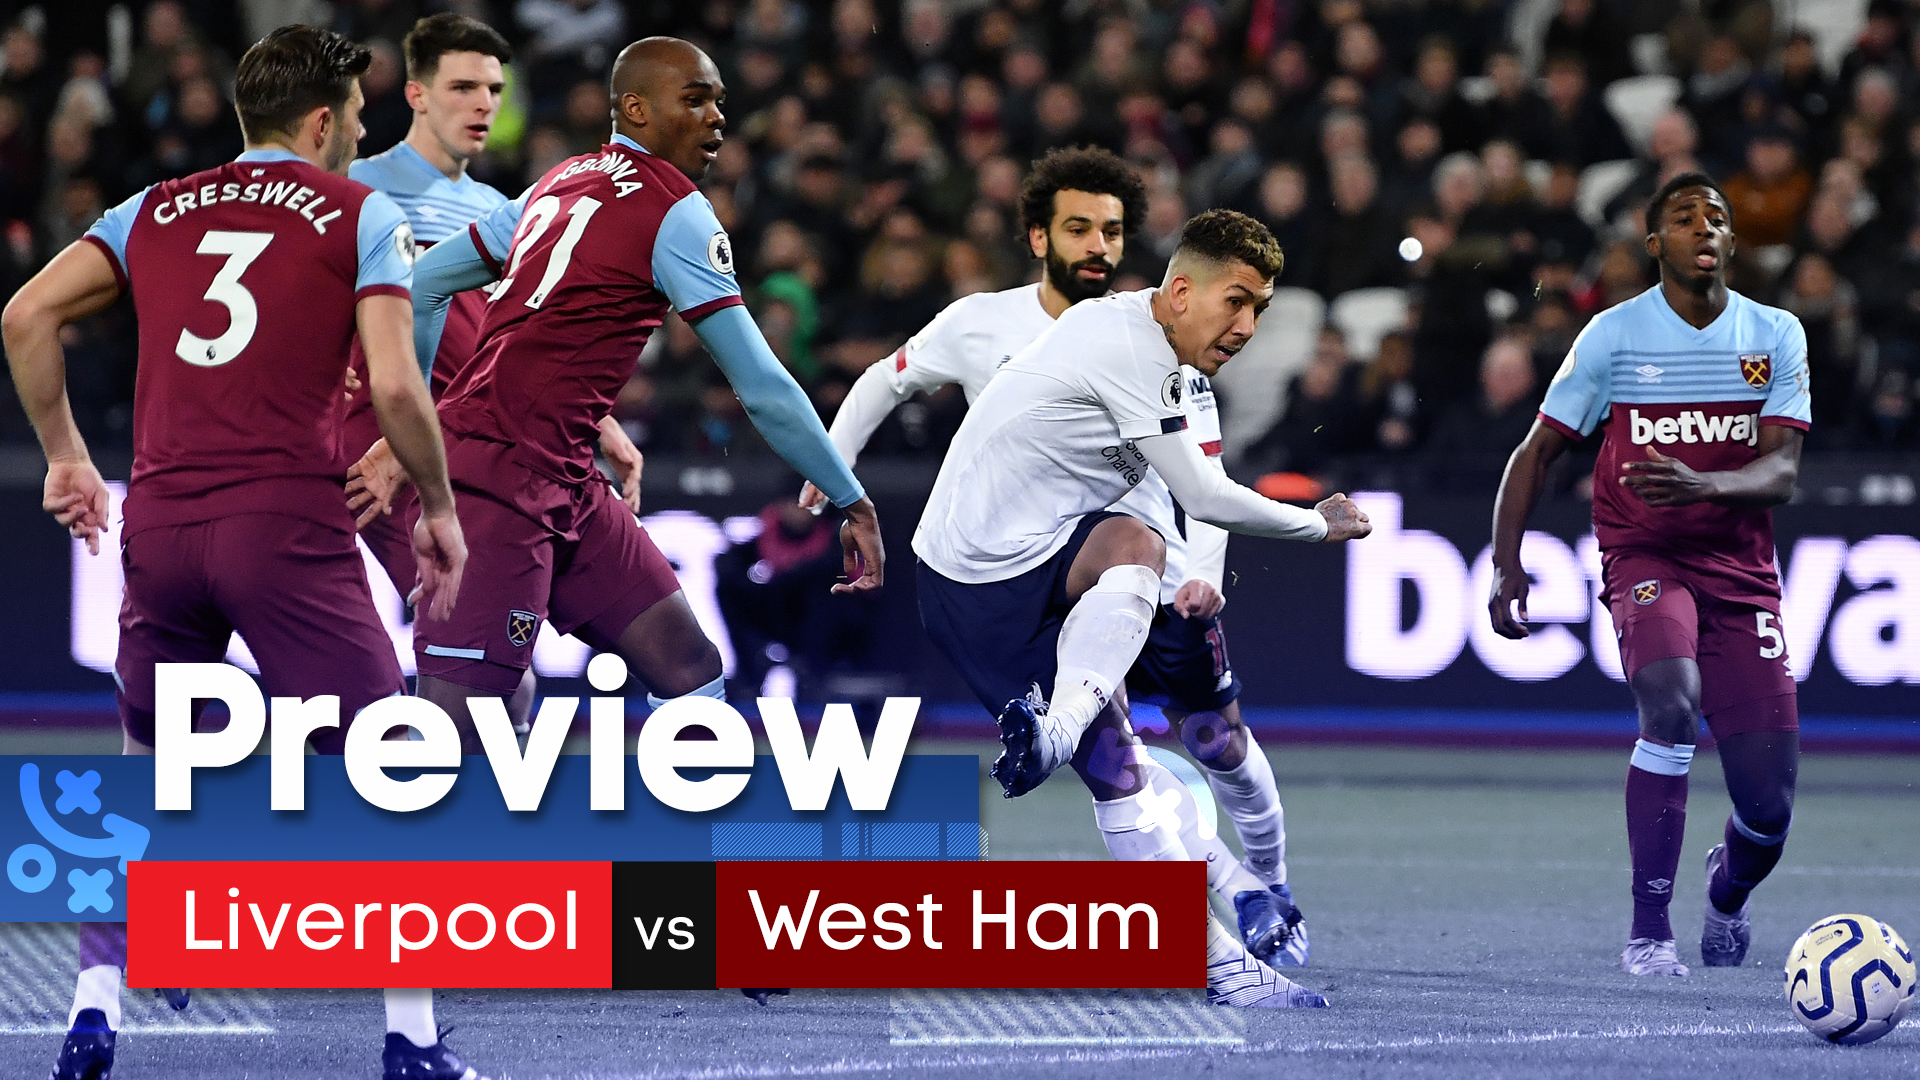 Liverpool v West Ham preview: Preview, prediction, stats and best bets for Premier League game at Anfield